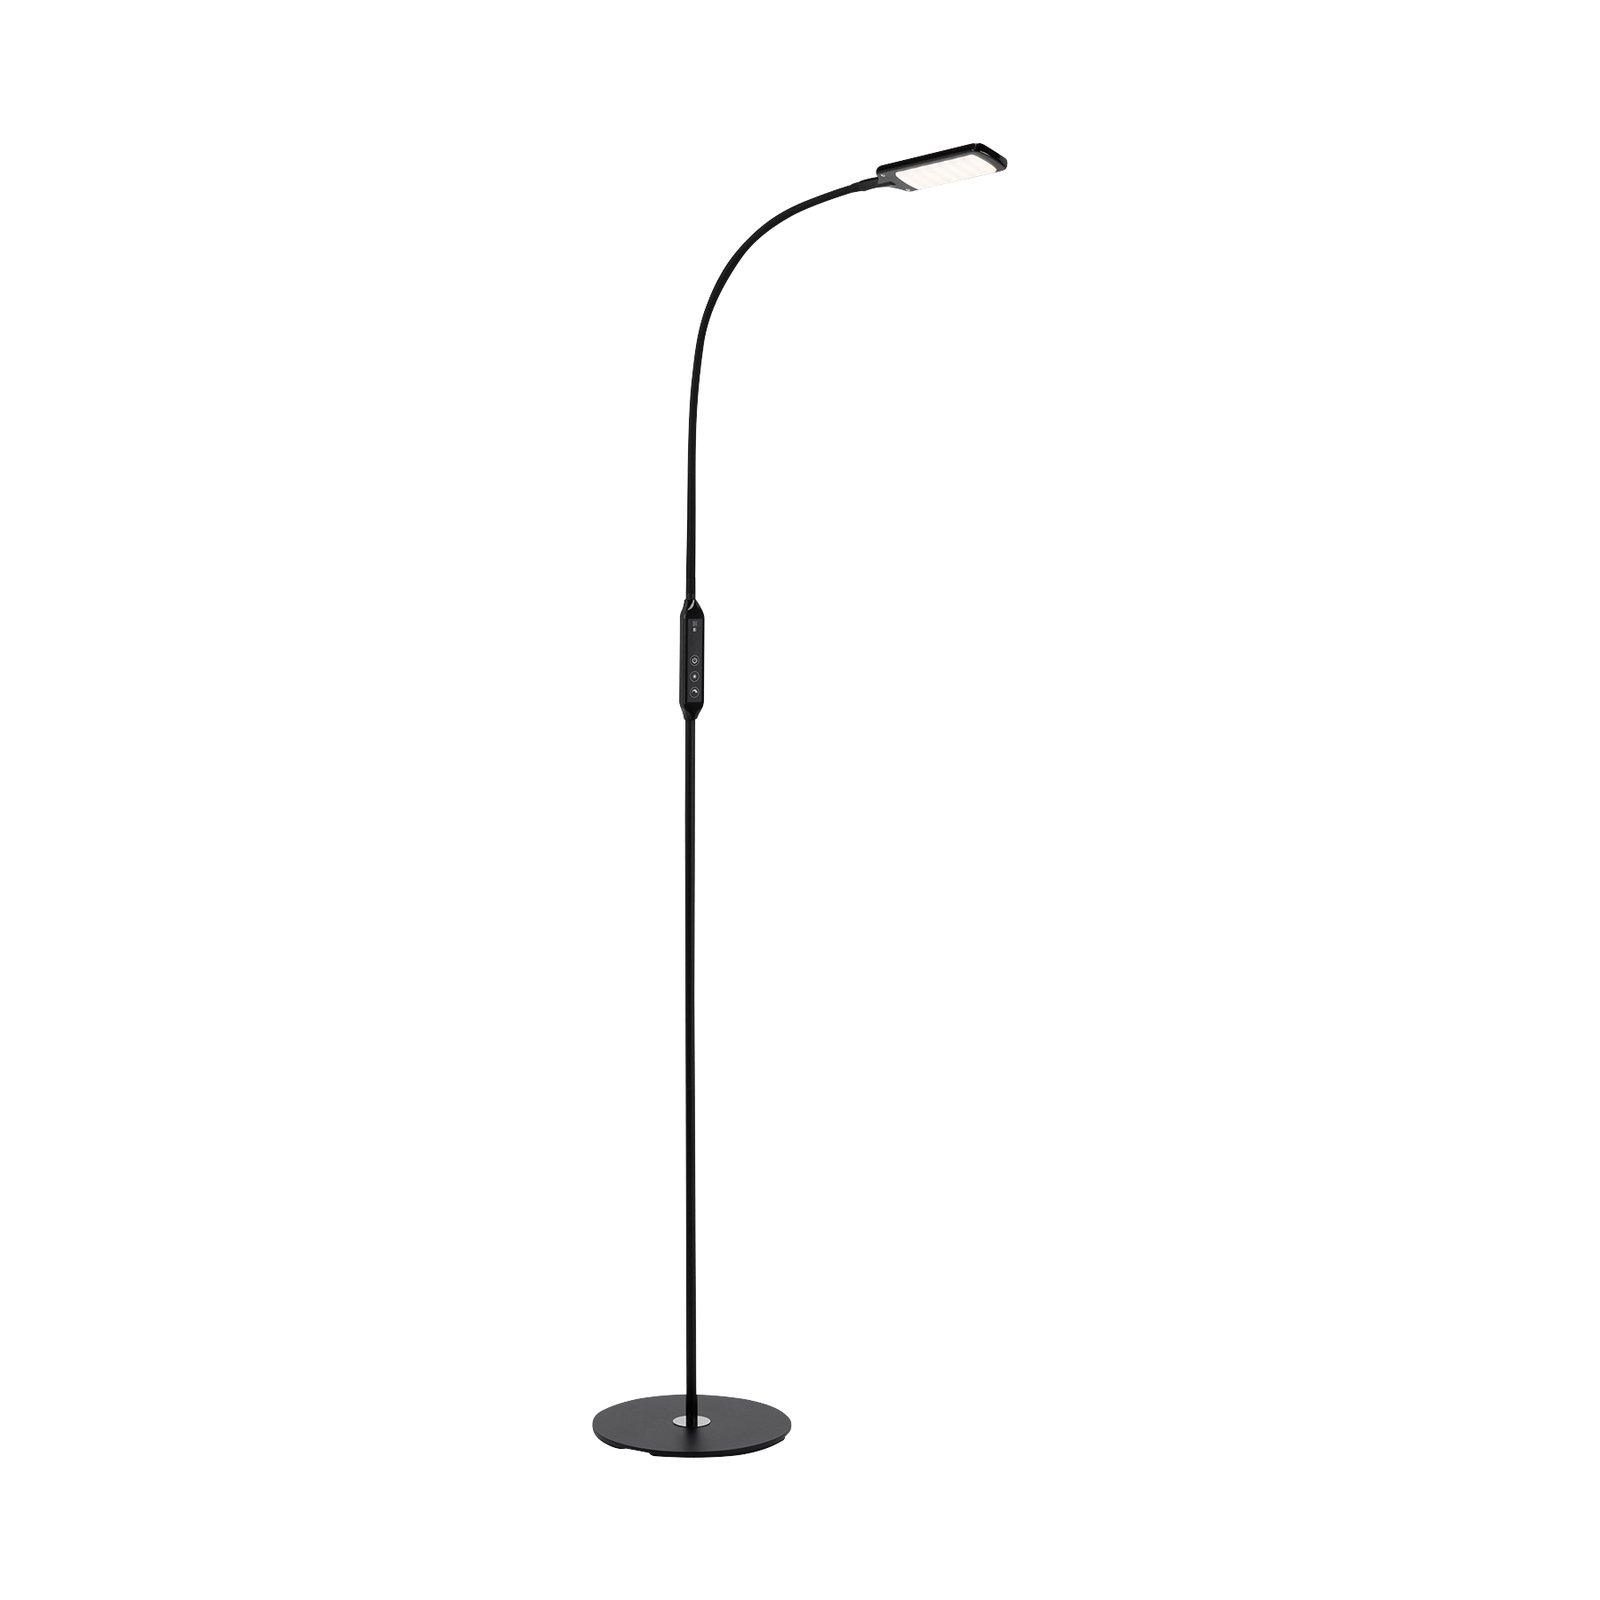 LED office floor lamp Office Remote, black, dimmable, CCT